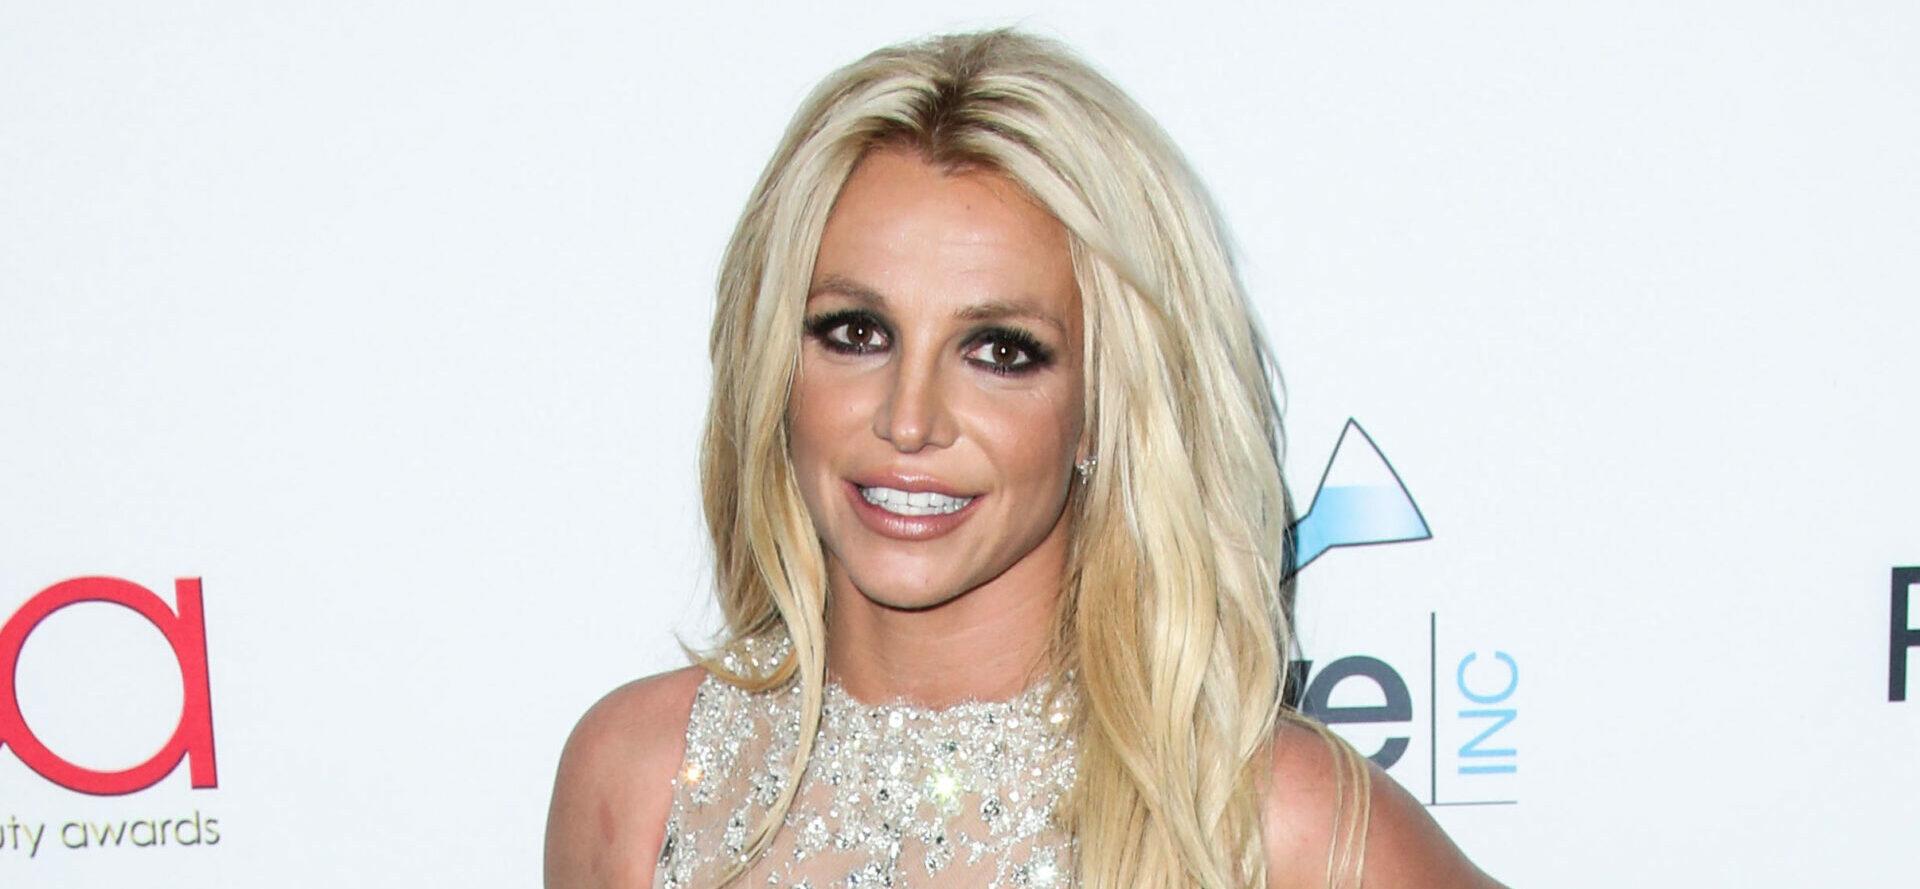 Britney Spears Shares Adorable Throwback With Her Dog Sawyer